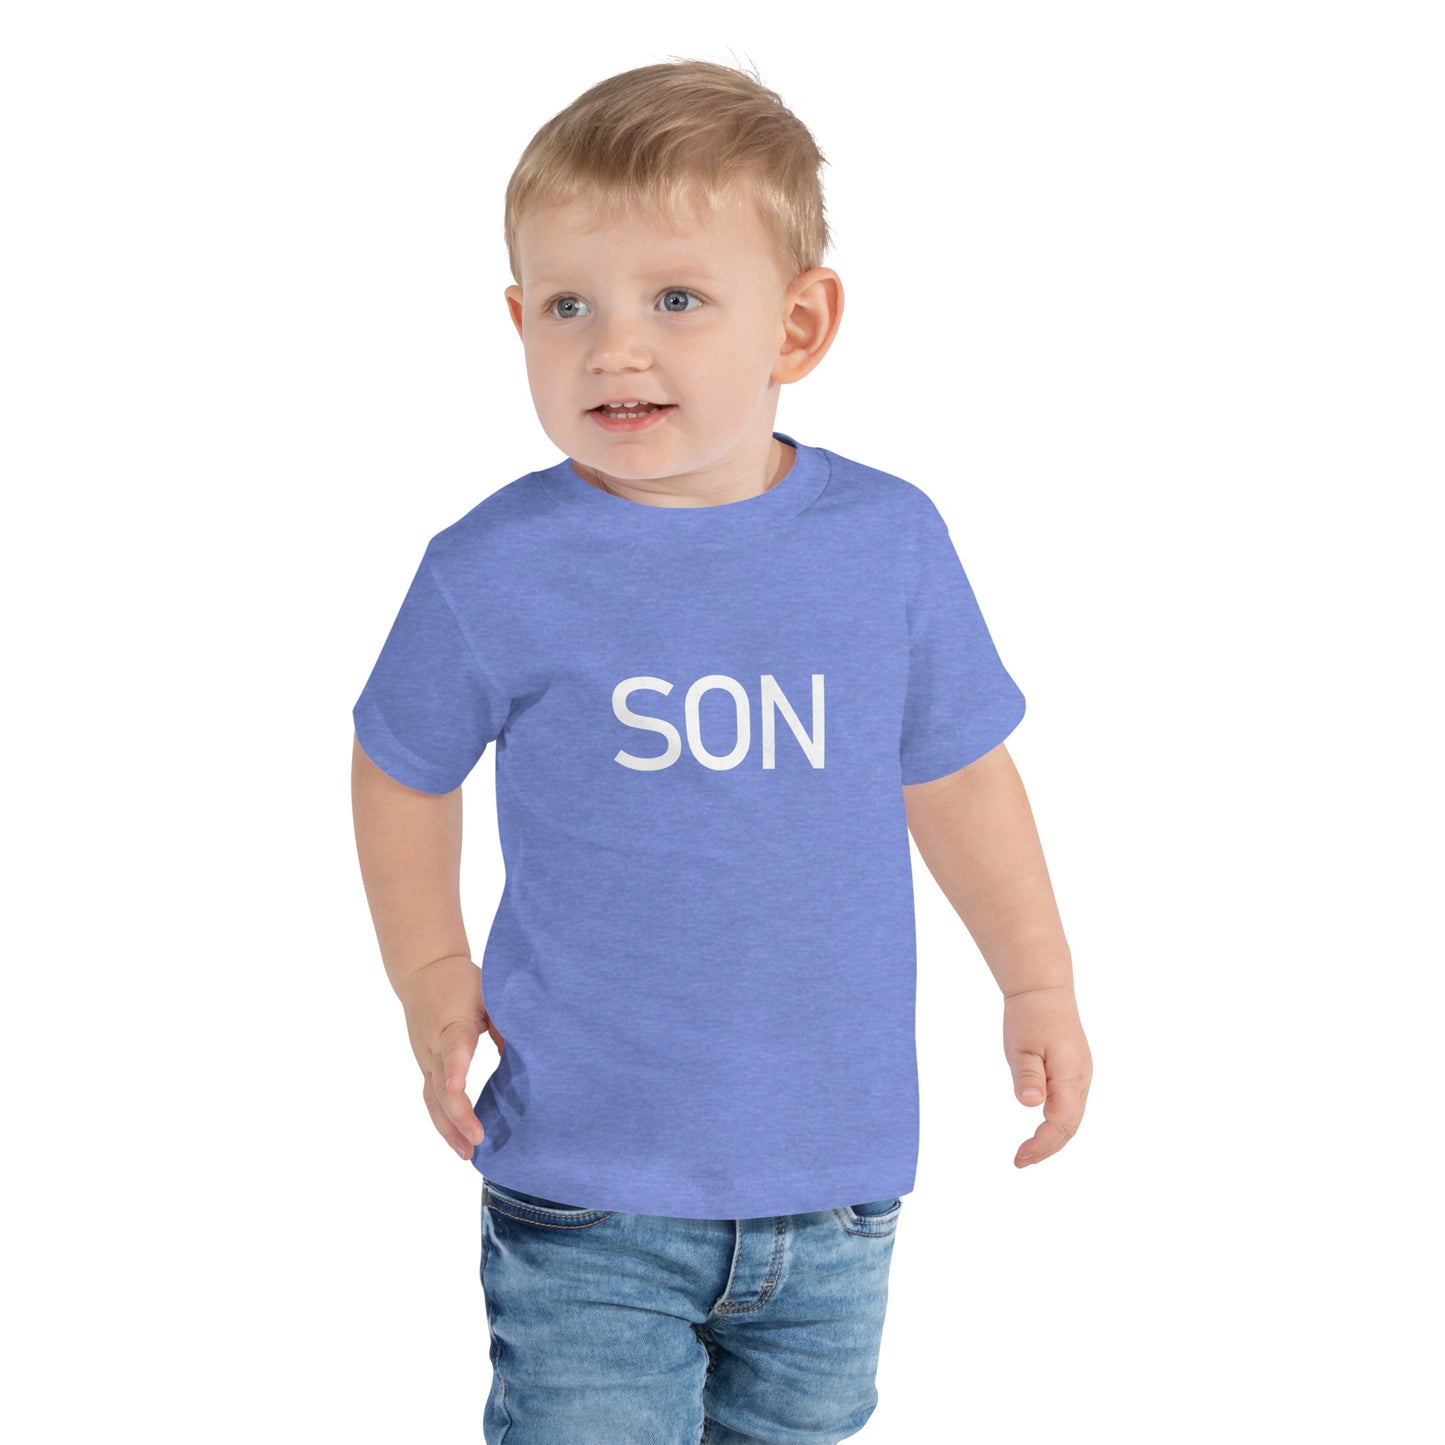 Son - Sustainably Made Toddler T-shirt